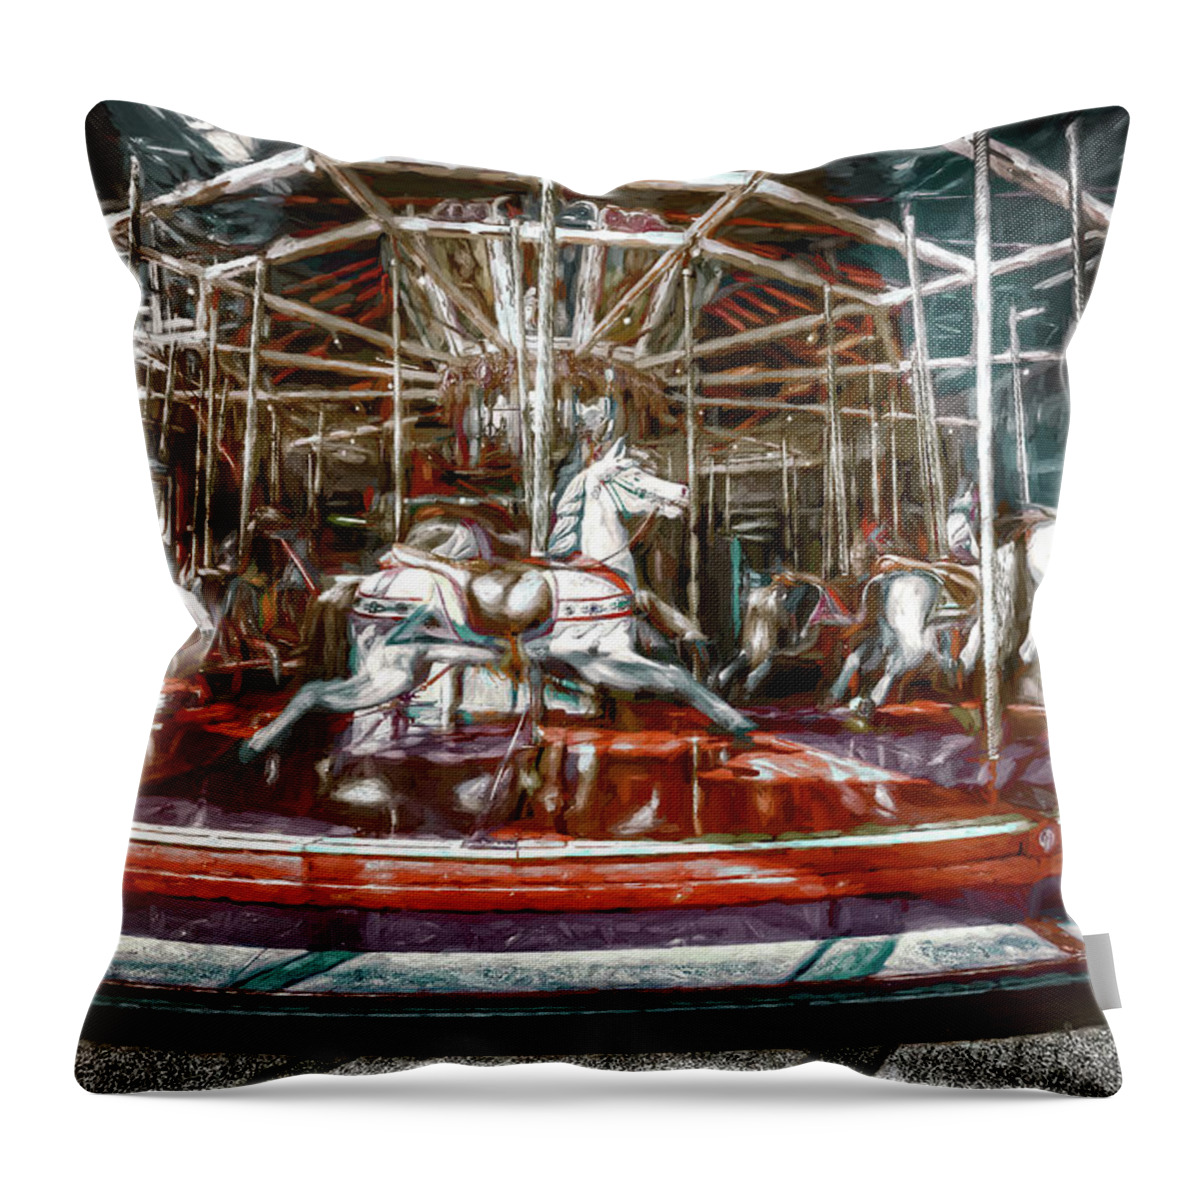 Merry-go-round Throw Pillow featuring the digital art Carousel Of Time by Wayne Sherriff